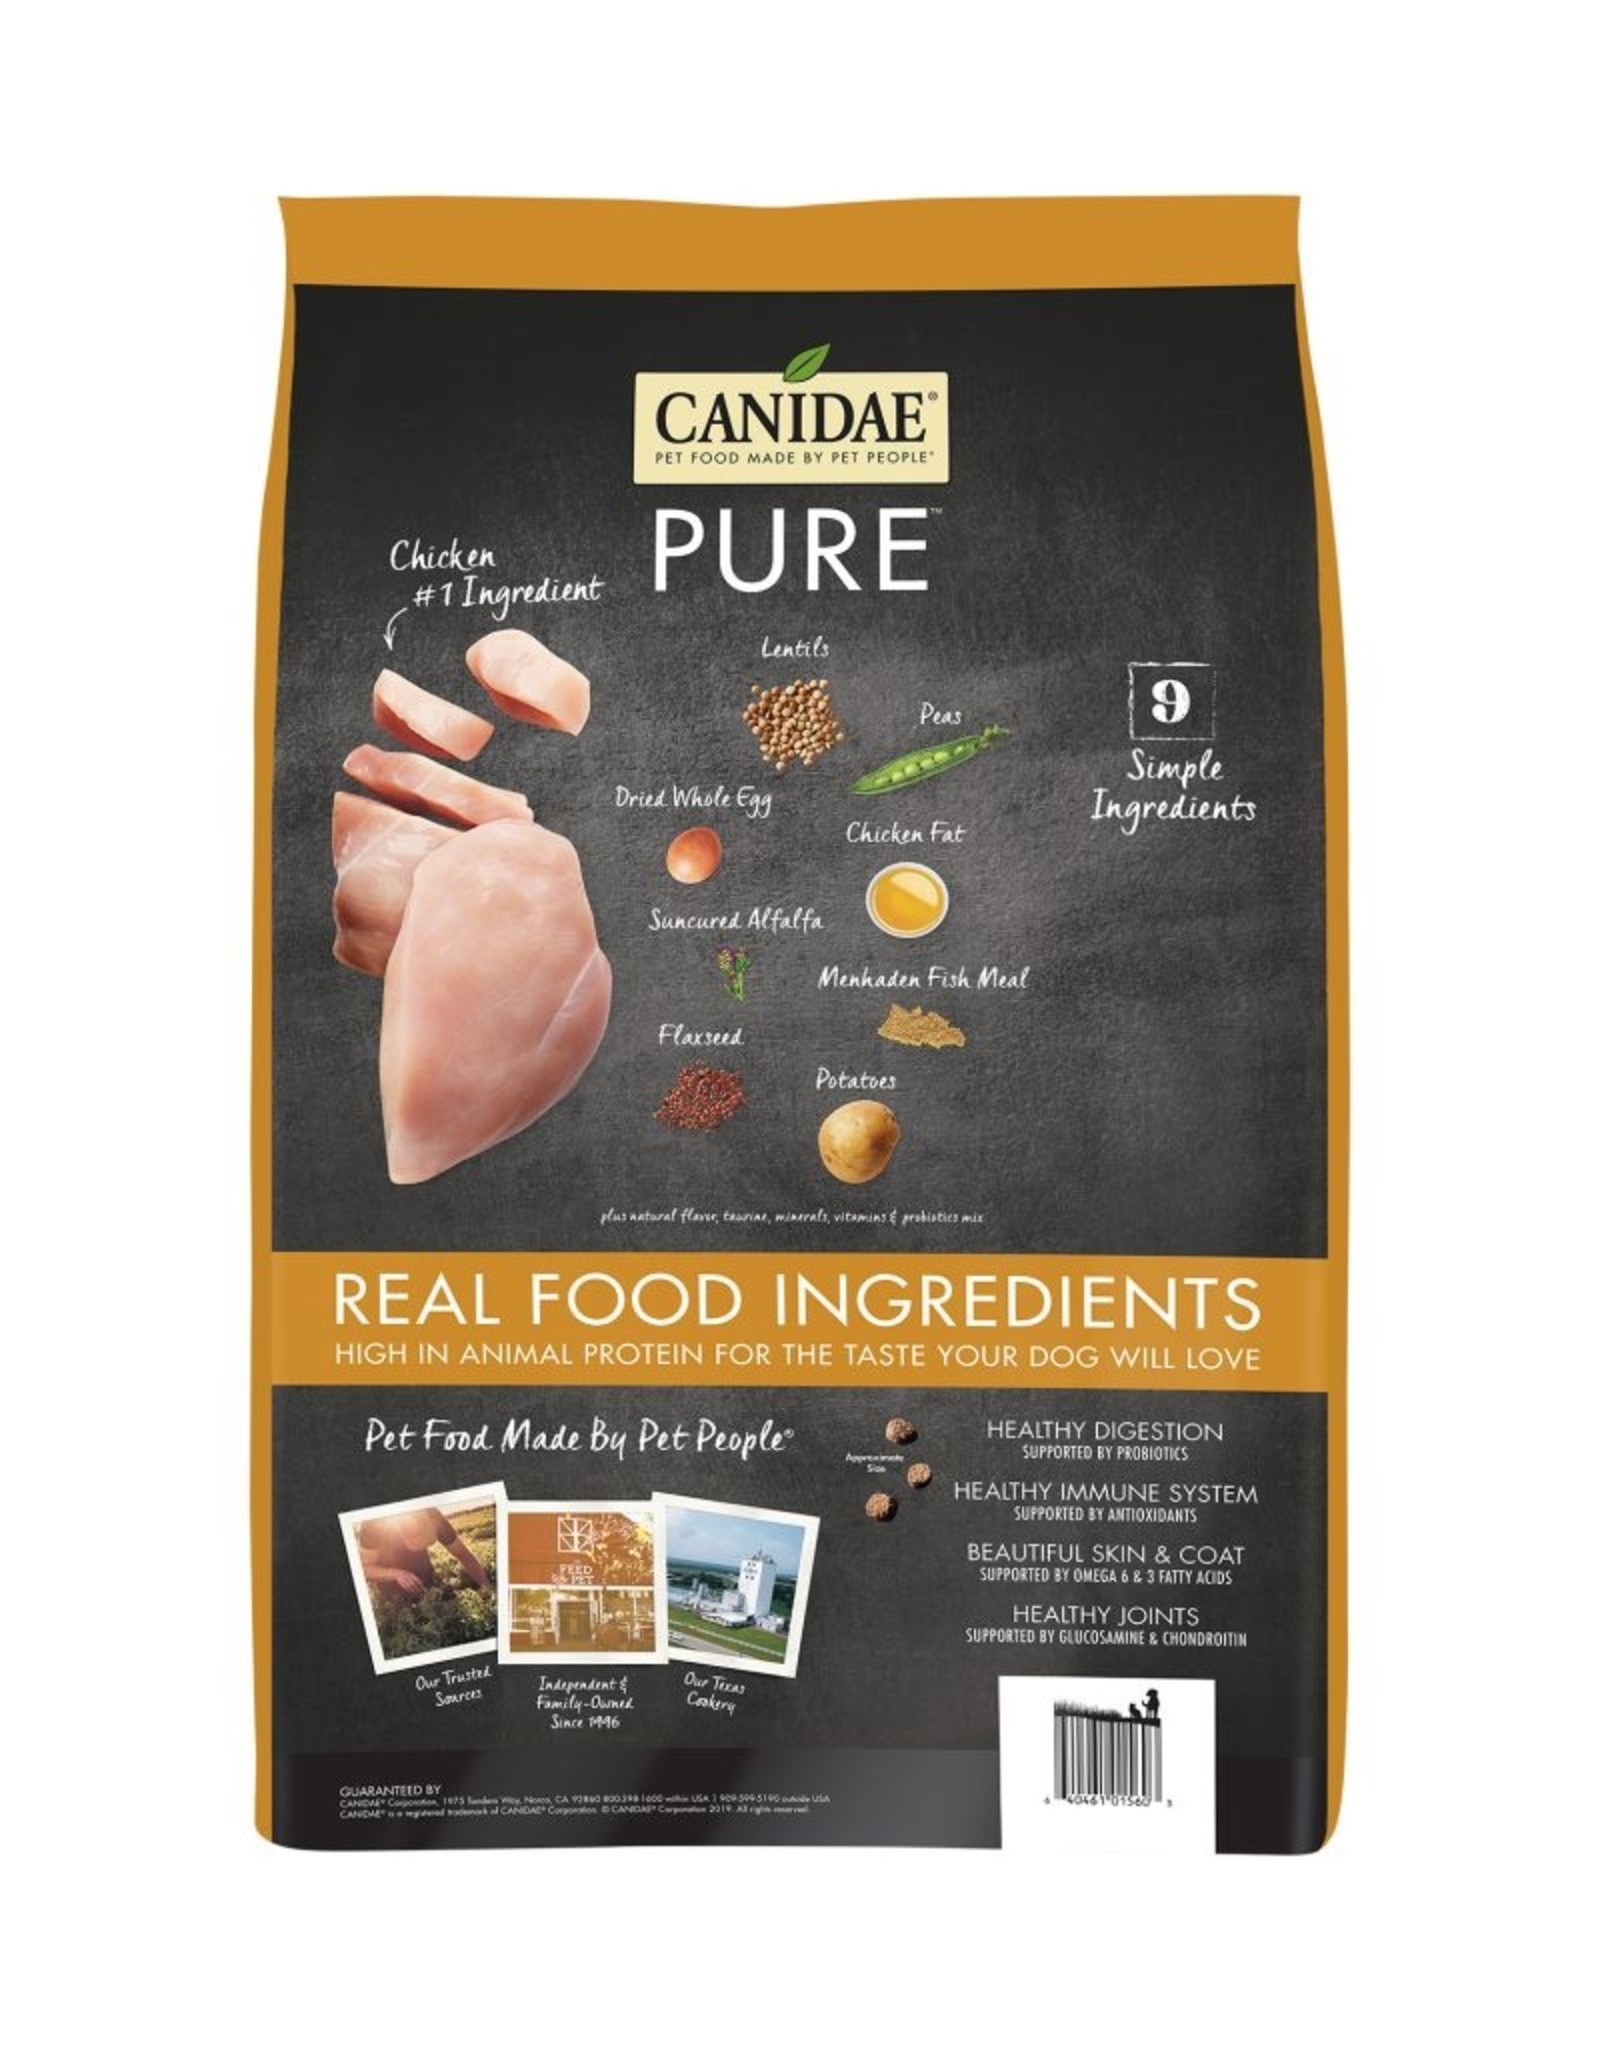 CANIDAE PET FOODS CANIDAE PUPPY GRAIN FREE PURE CHICKEN 4LBS